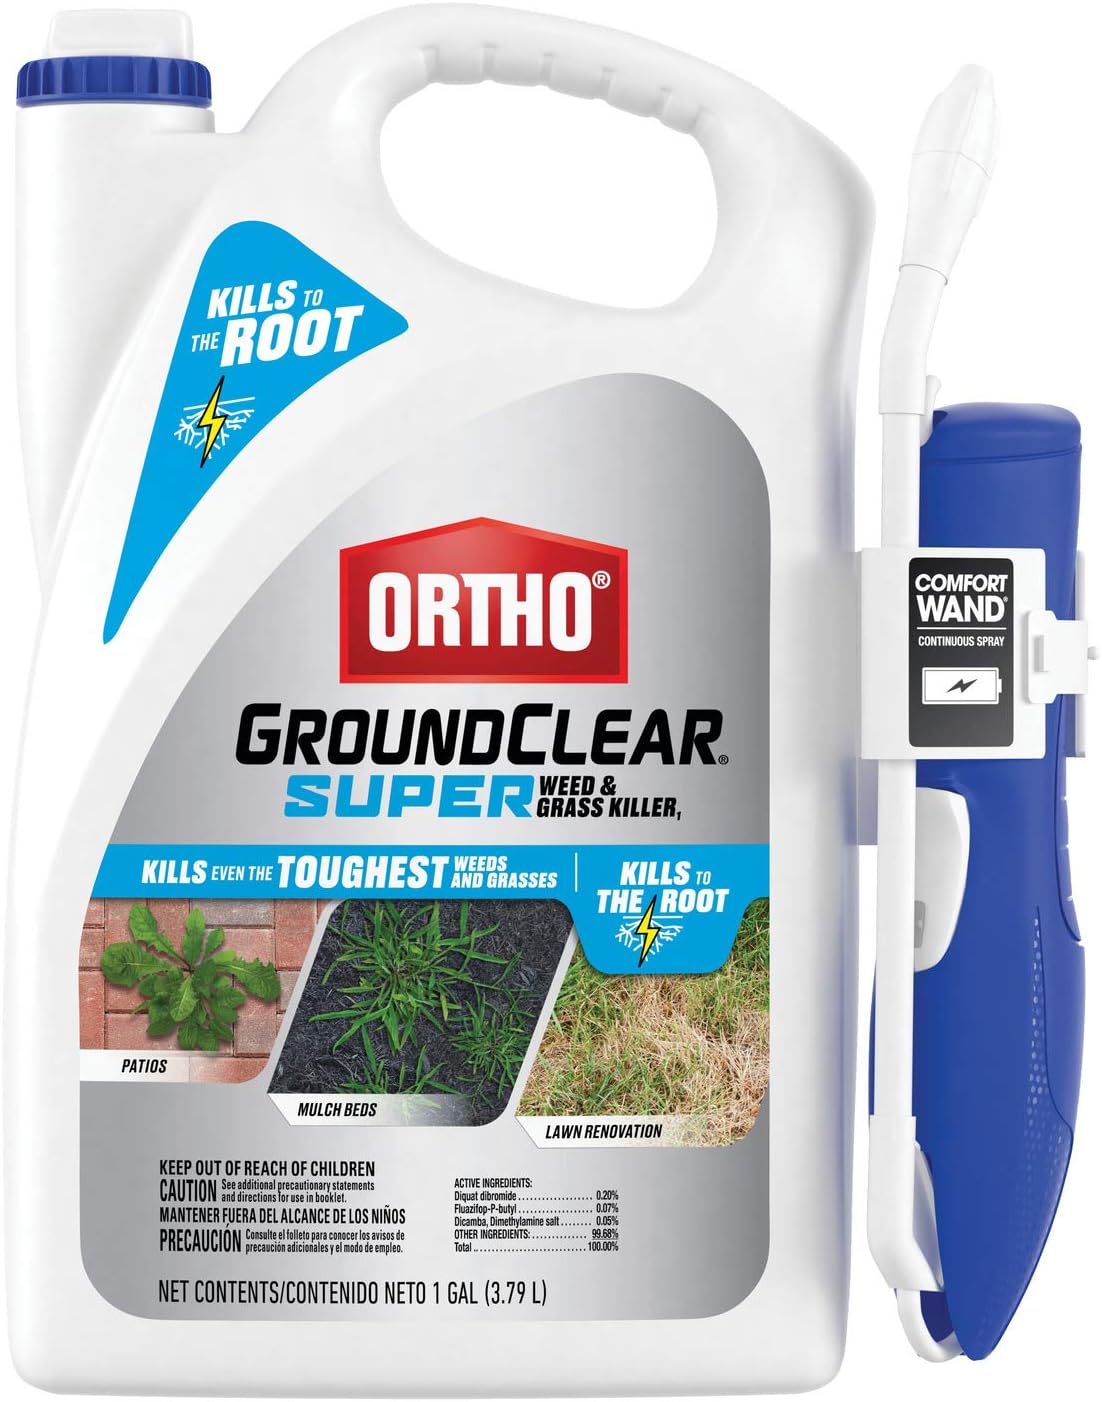 Ortho GroundClear Super Weed & Grass Killer1: with [...]